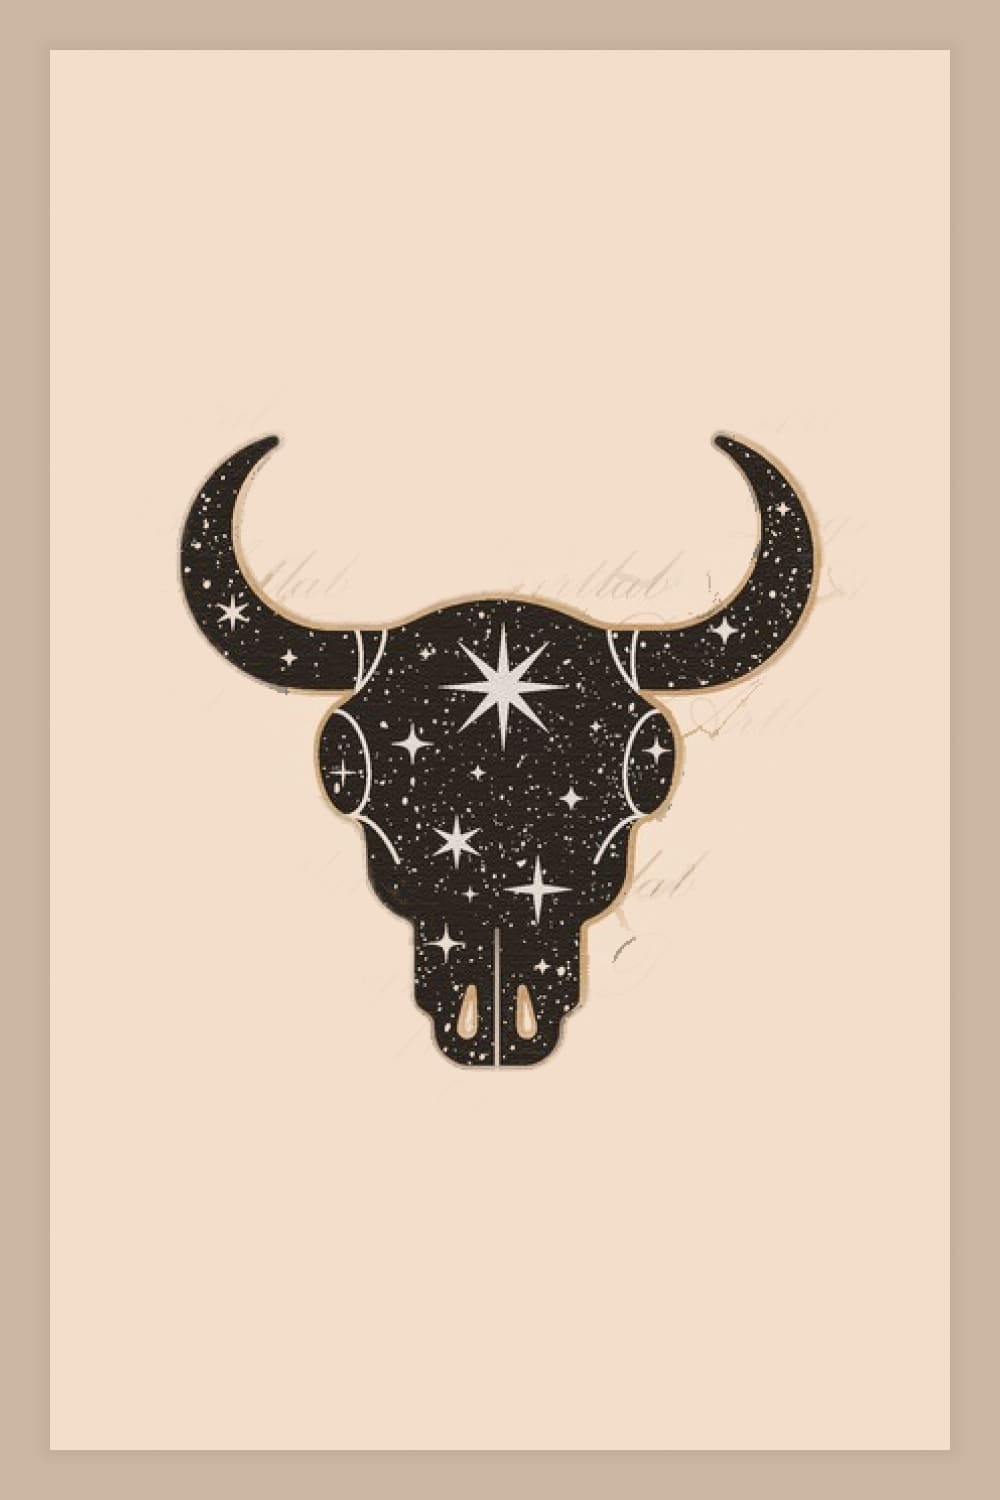 Cow skull with stars on a beige background.